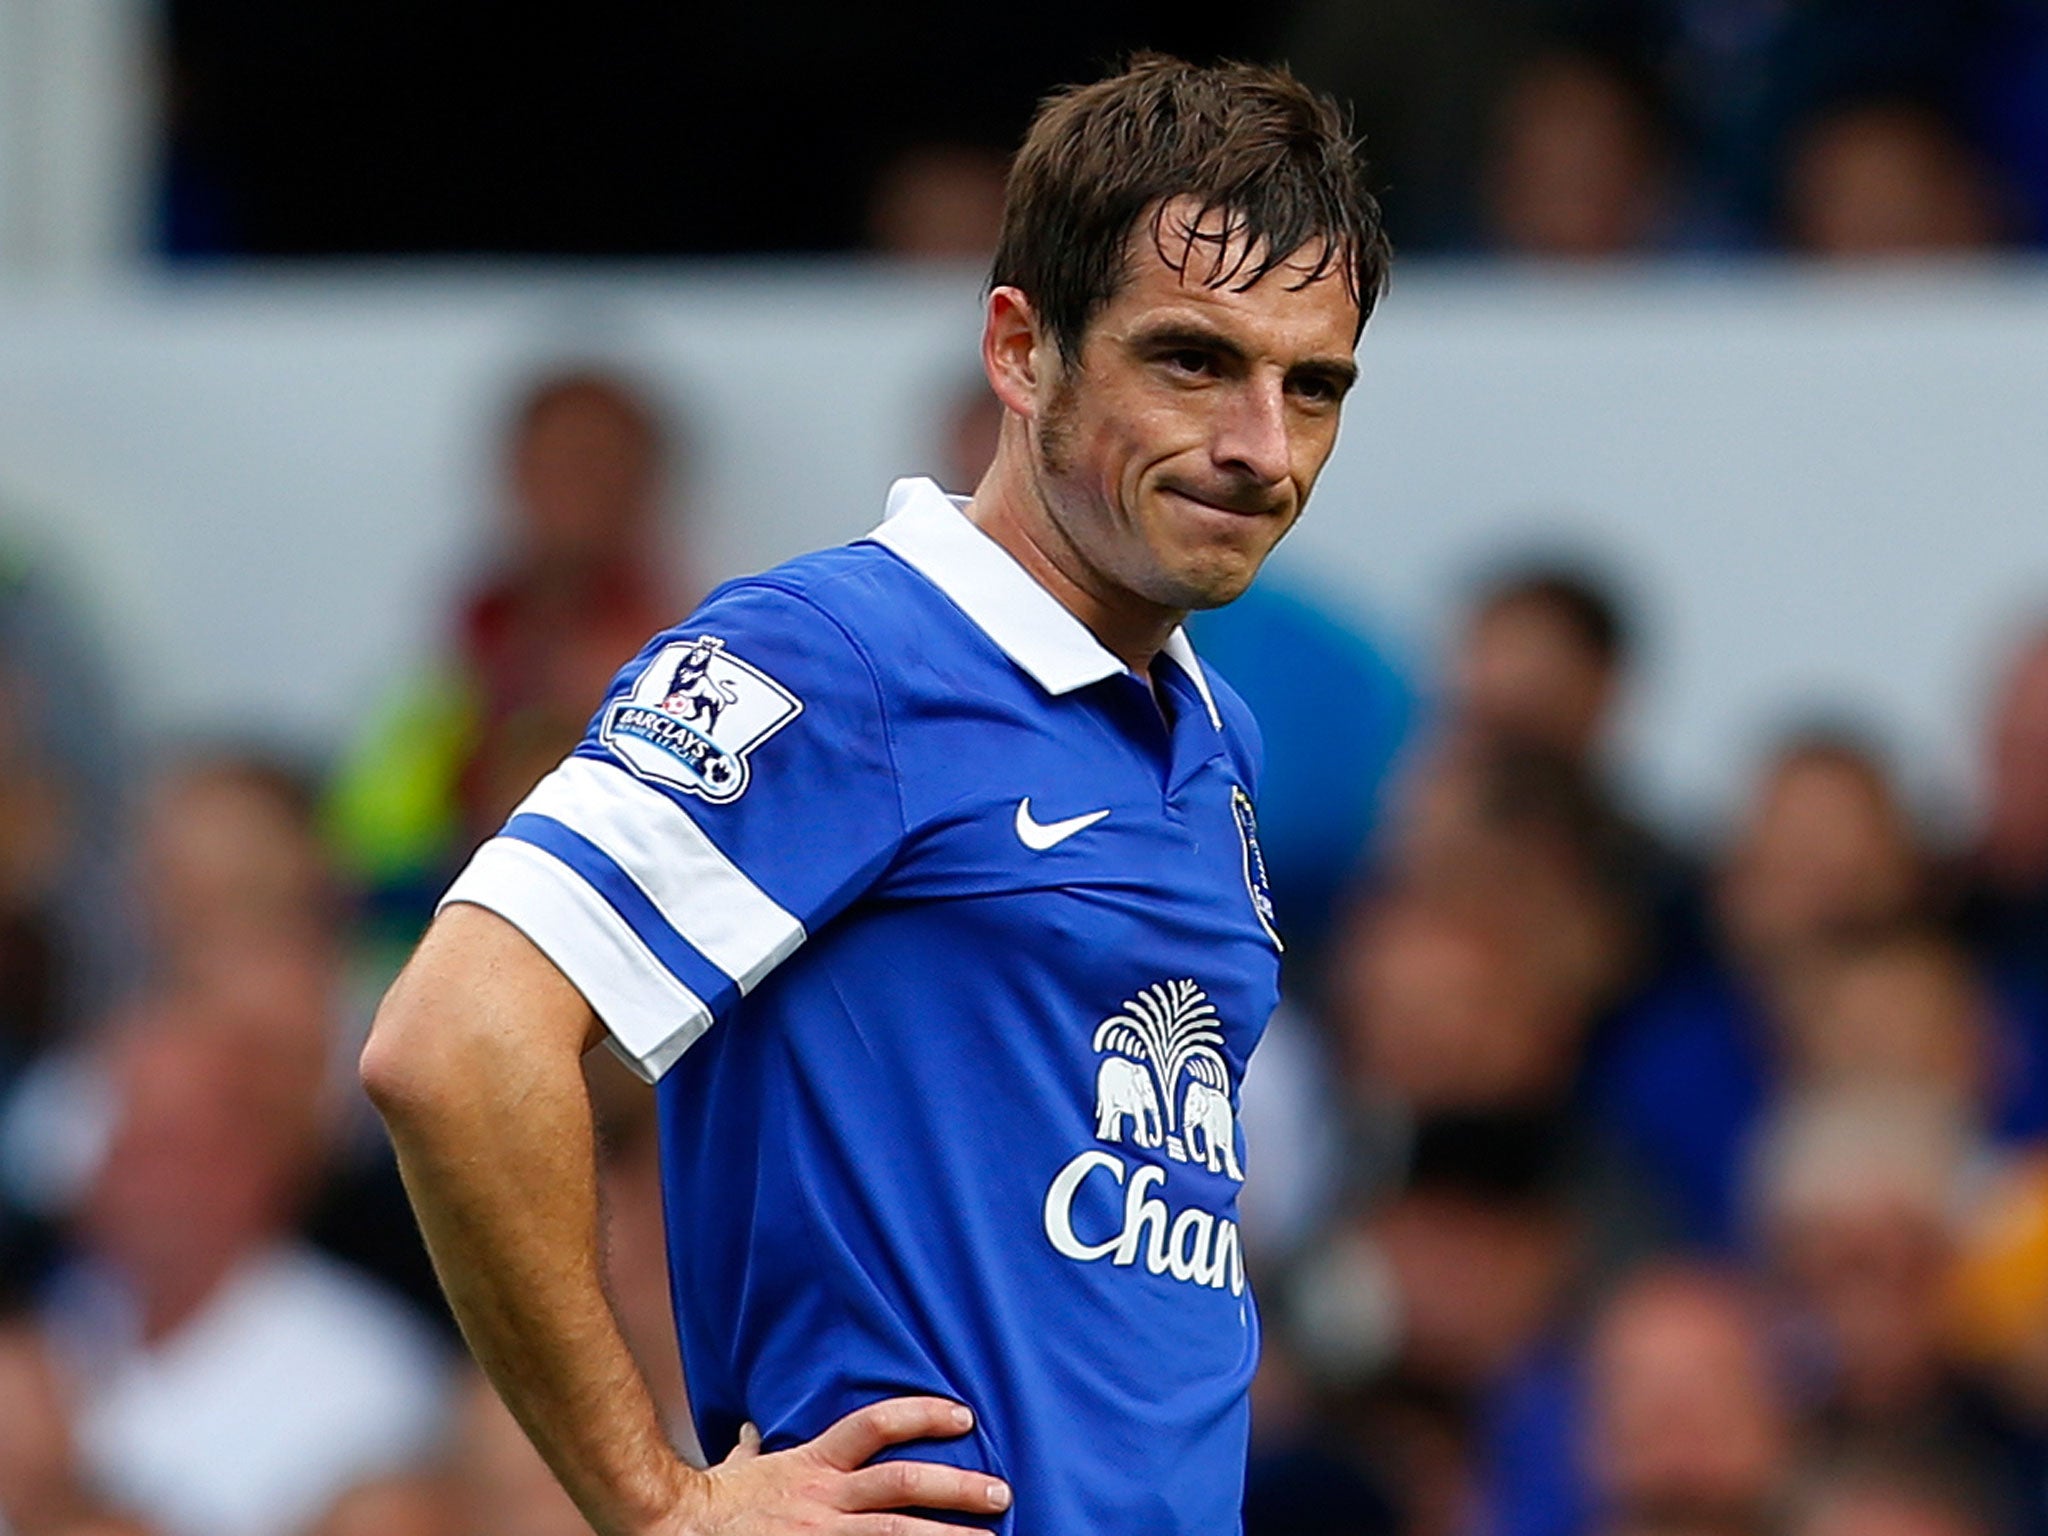 Leighton Baines started for Everton